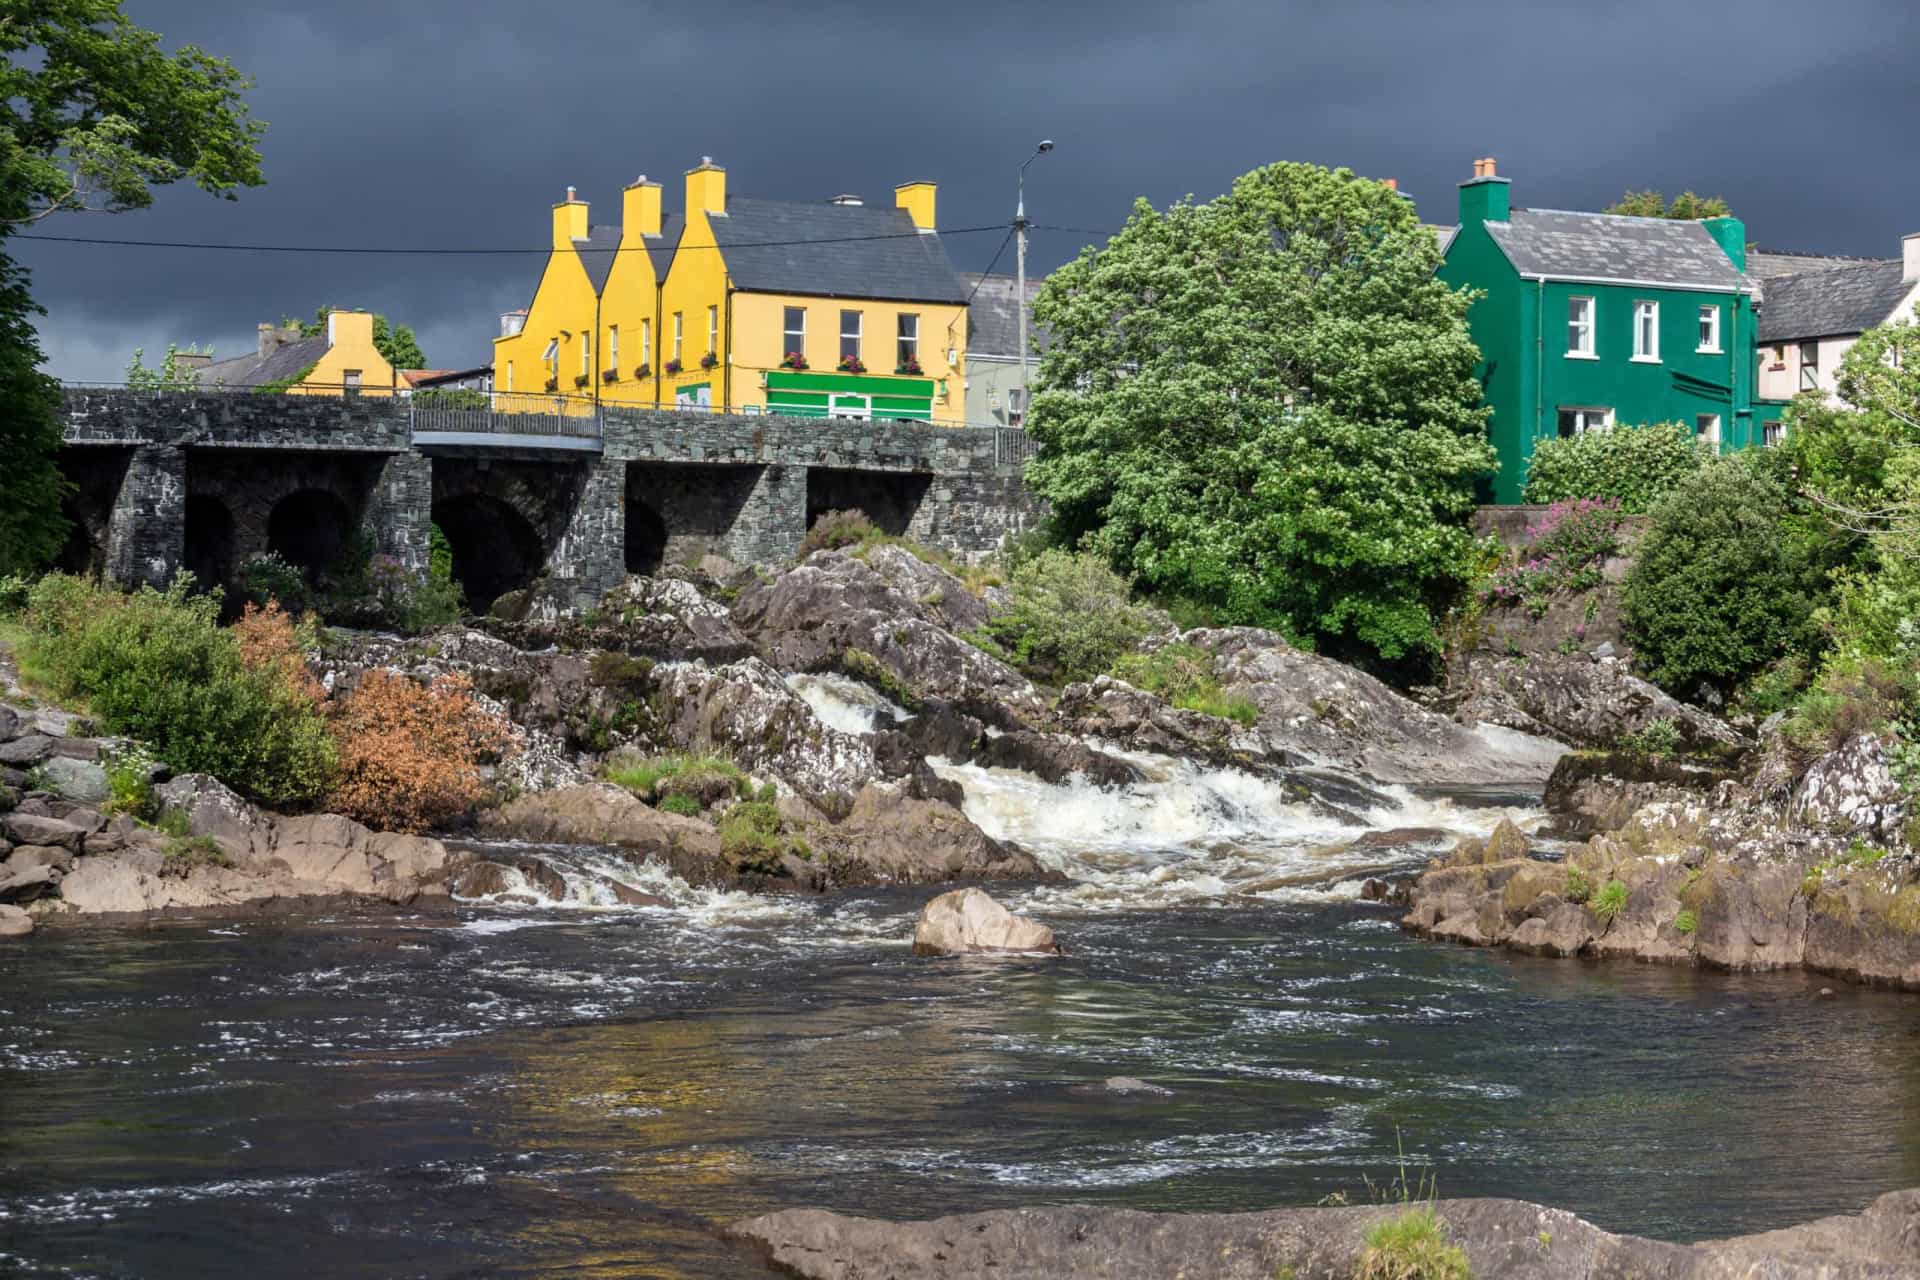 <p>The charming village of Sneem is considered "the knot" in the Ring of Kerry—a 179-km-long (111 mi) circular tourist route in County Kerry that serves as a scenic bracelet enclosing a beautifully wild and stark landscape.</p>